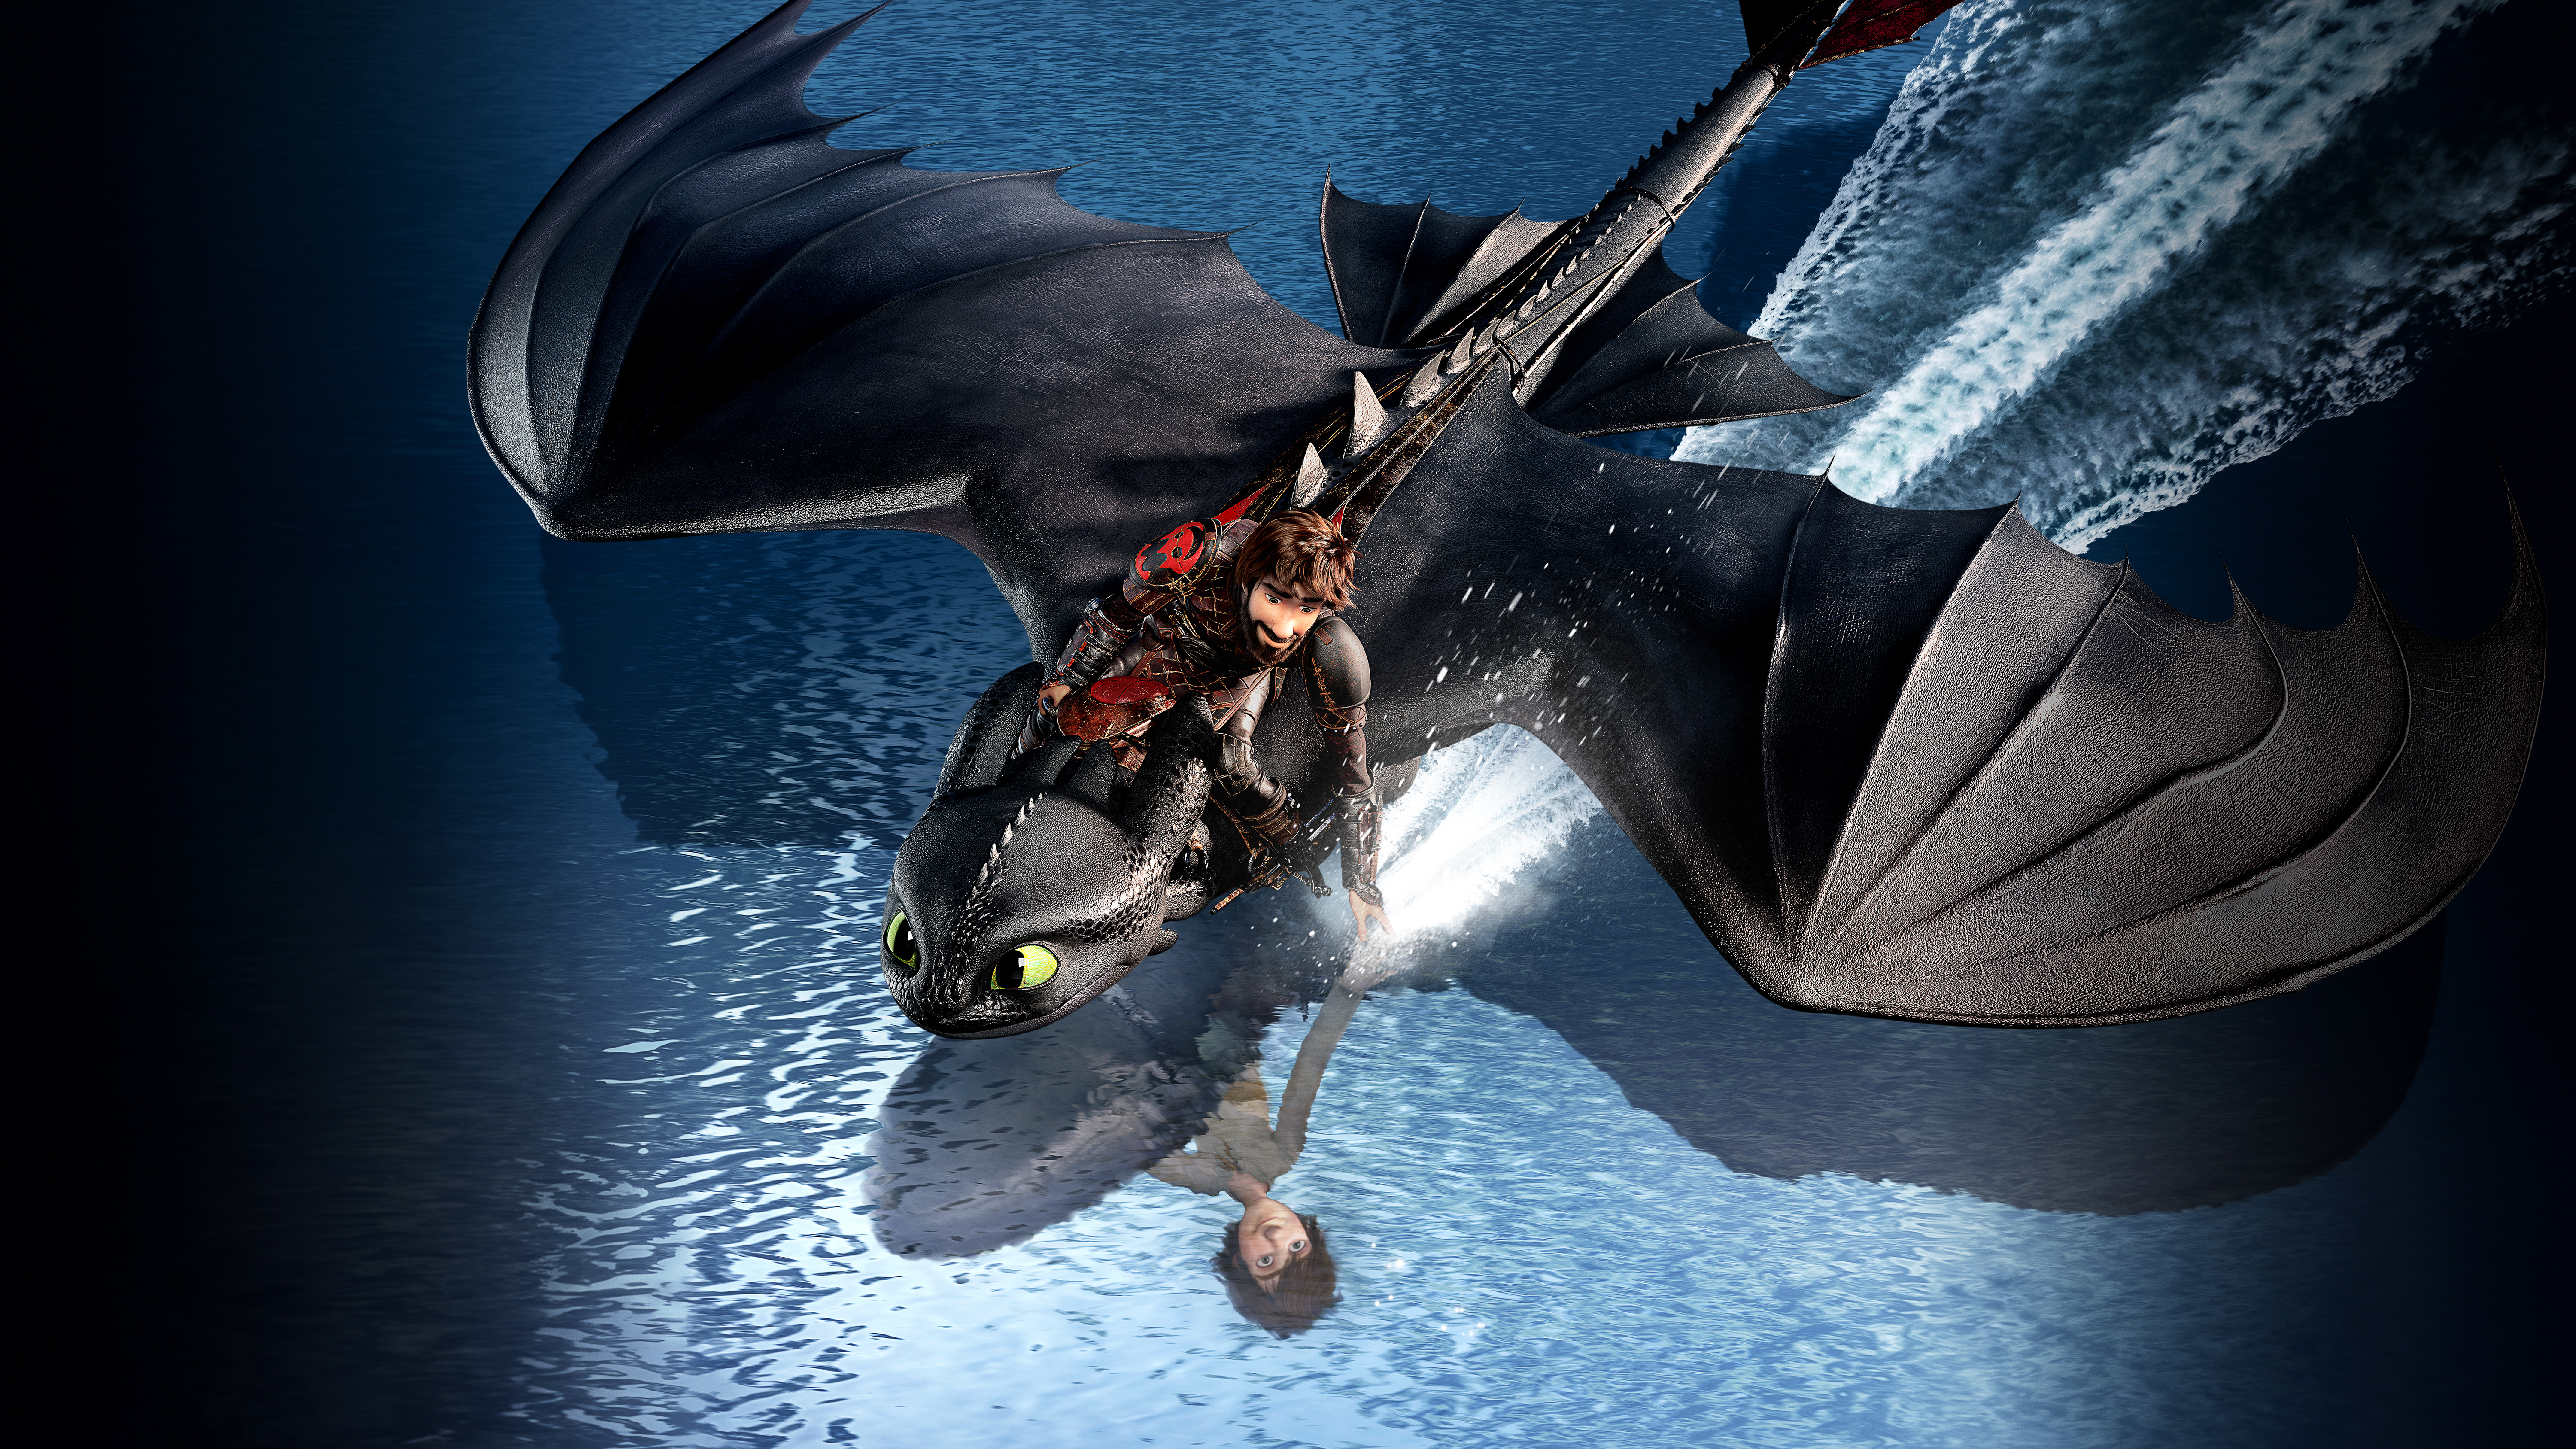 How to Train Your Dragon 3 The Hidden World 2019 5K